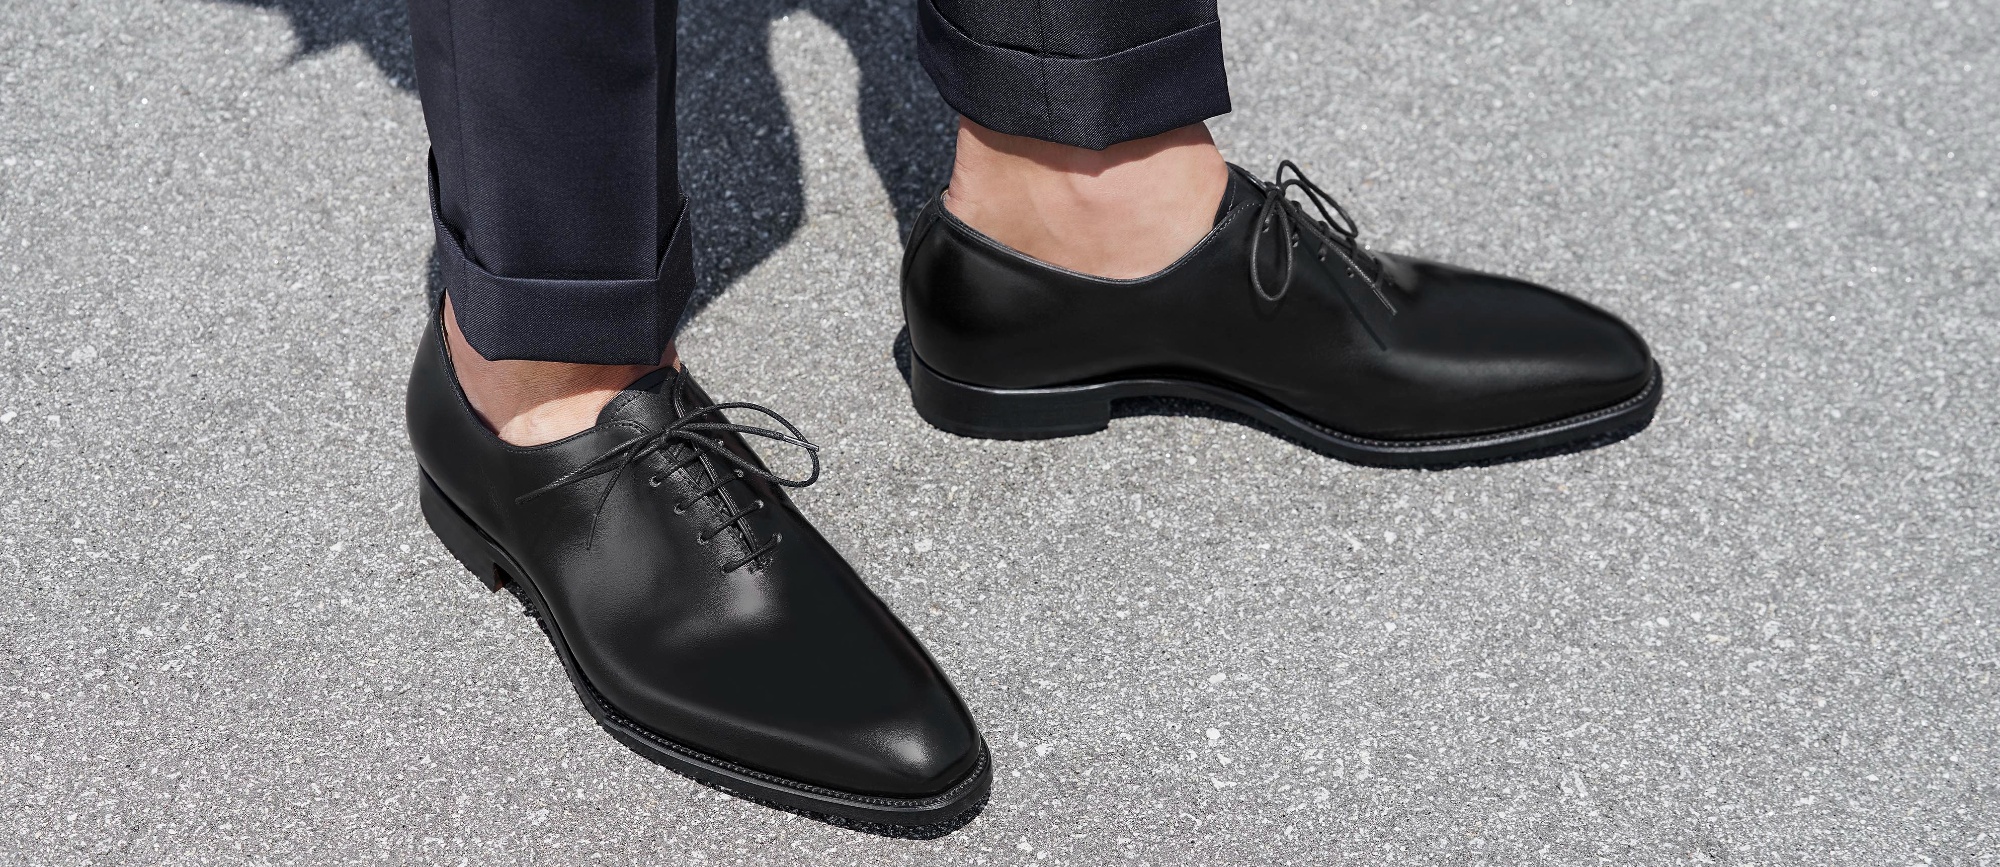 One-Cut Shoes for Men